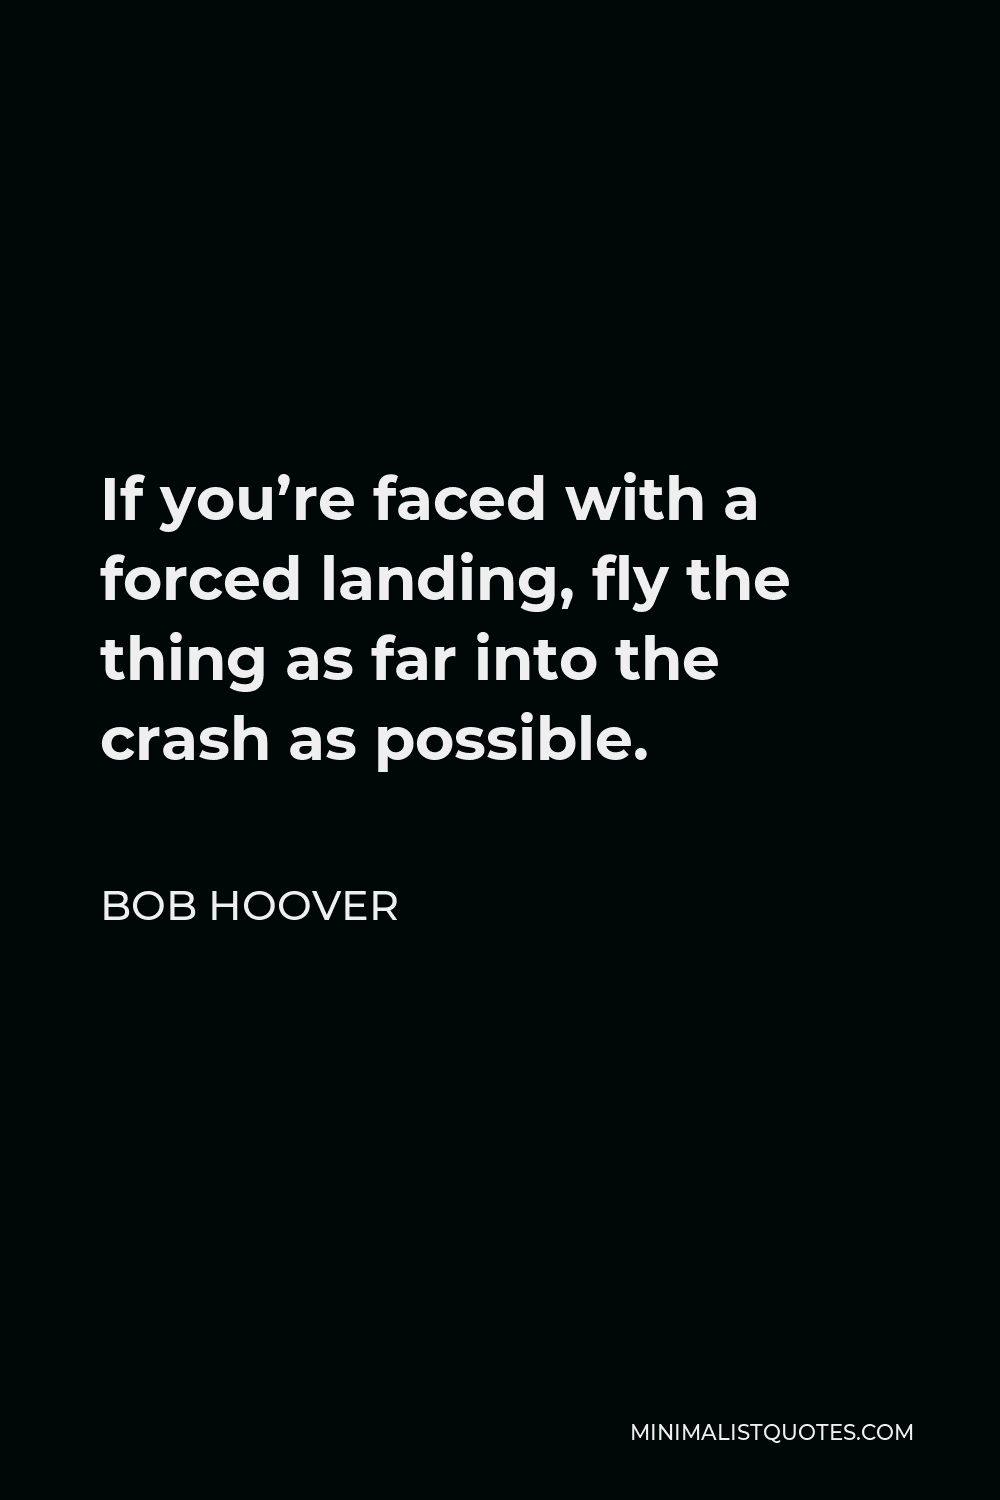 Bob Hoover Quote - If you’re faced with a forced landing, fly the thing as far into the crash as possible.